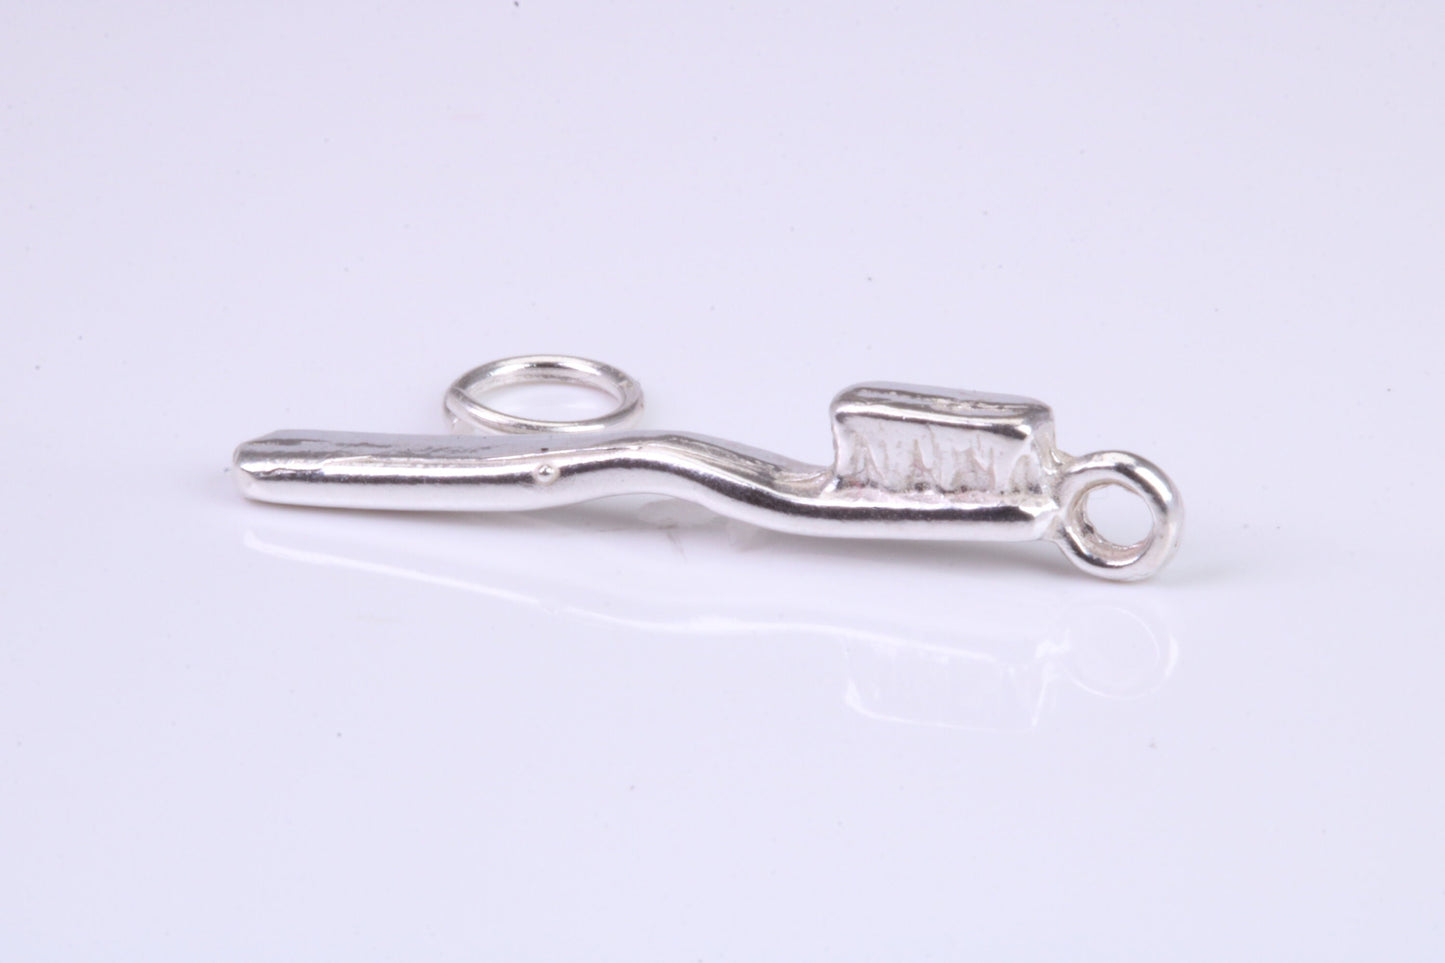 Tooth Brush Charm, Graduation Cap Charm, Traditional Charm, Made from Solid 925 Grade Sterling Silver, Complete with Attachment Link